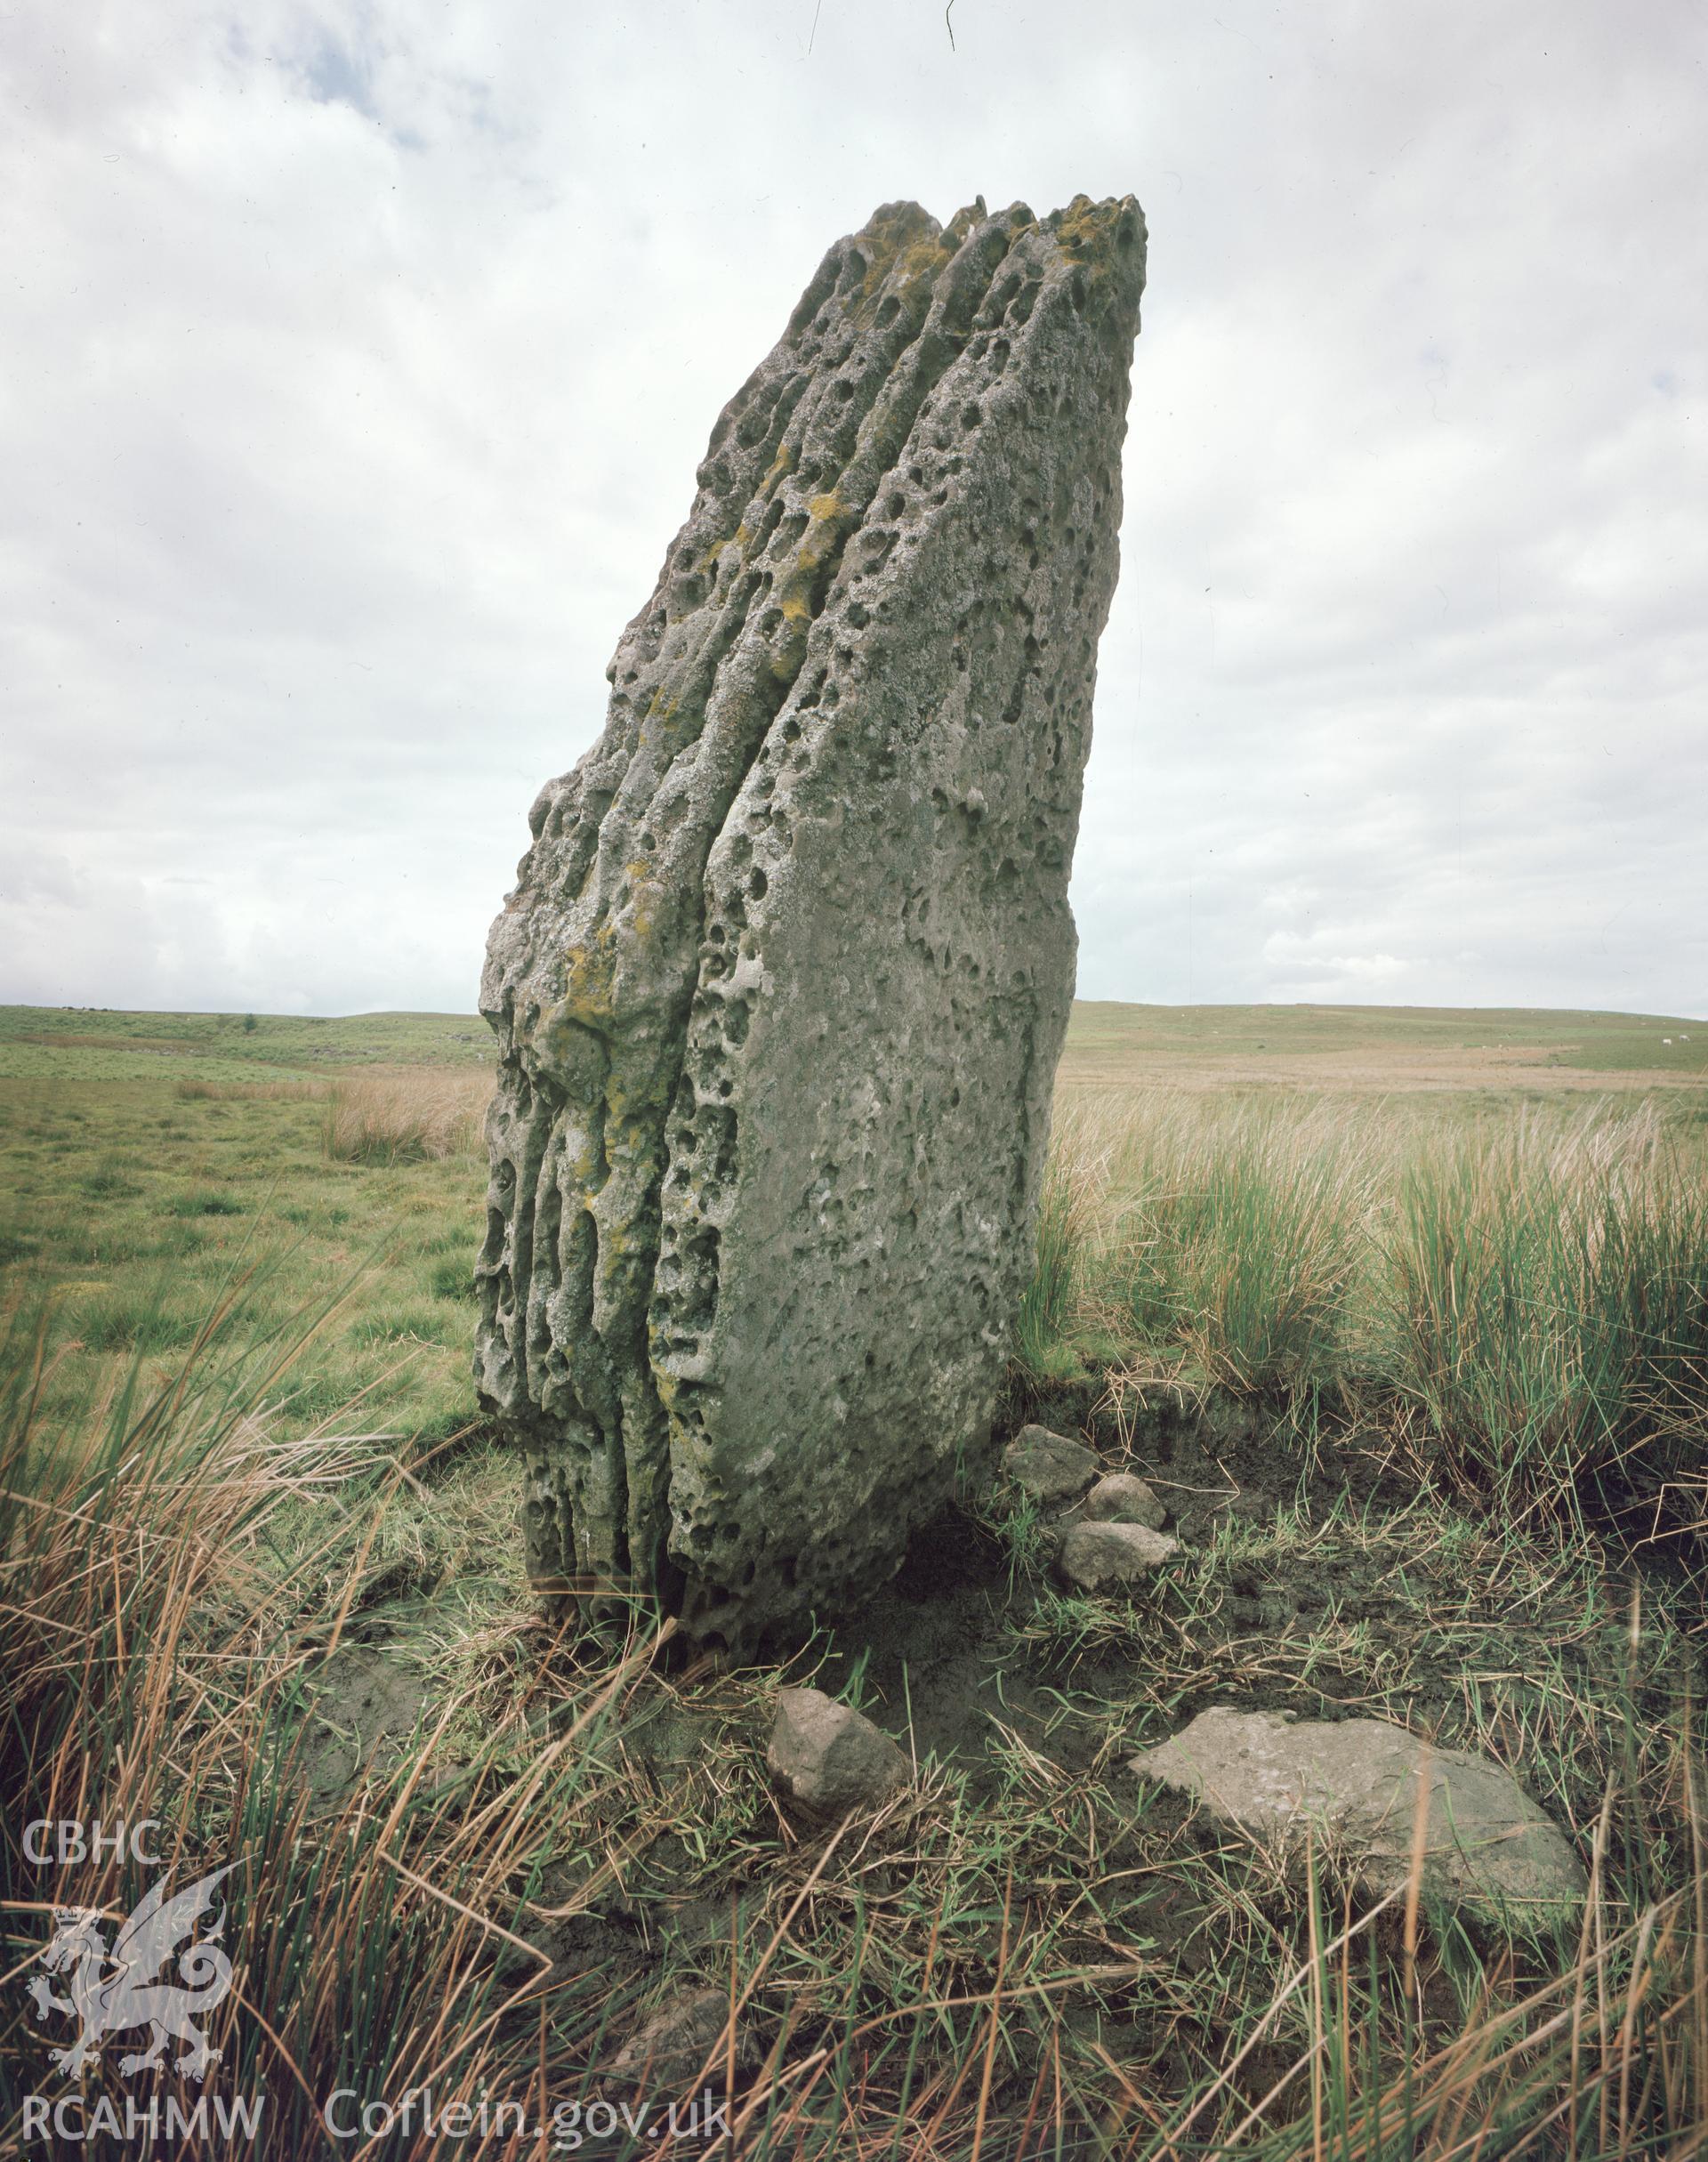 RCAHMW colour transparency showing  Carreg Waun Llech Standing Stone, taken by RCAHMW 1981